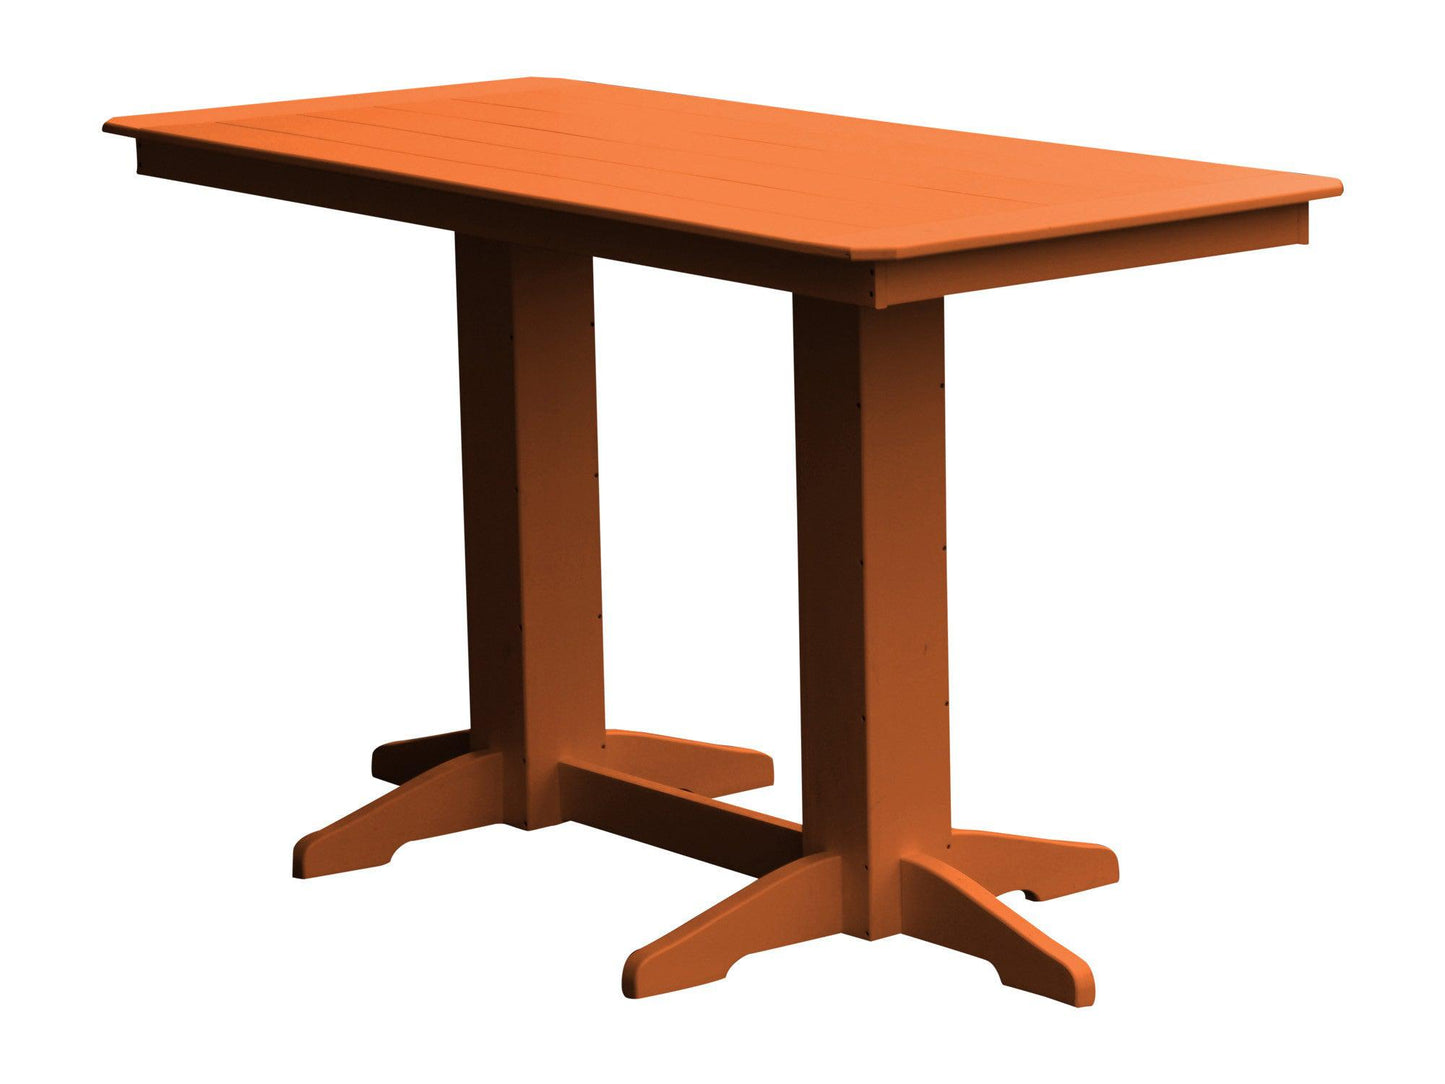 A&L Furniture Recycled Plastic 6' Bar Table - Orange